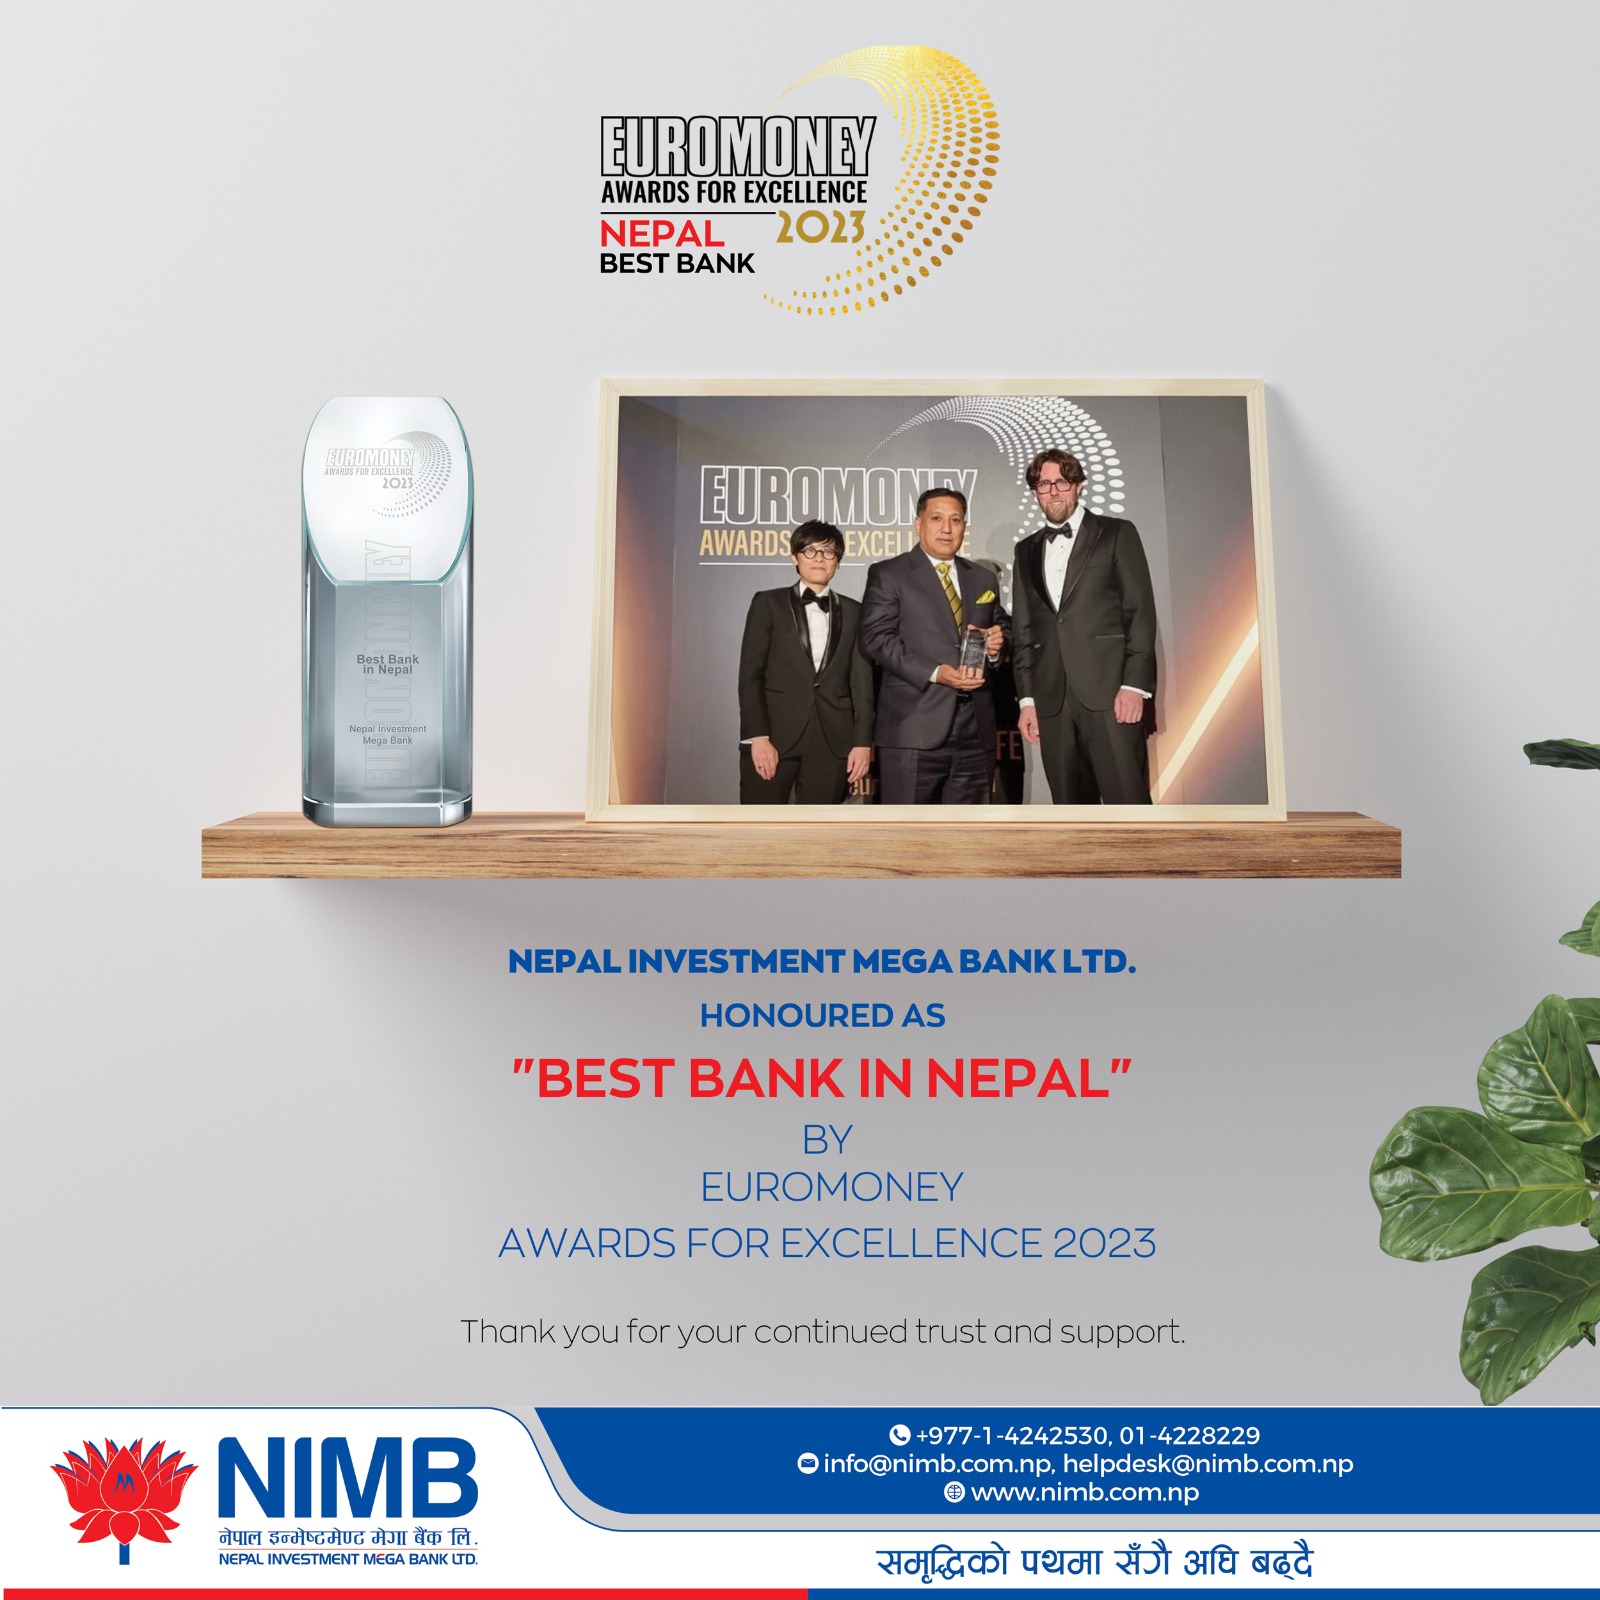 NIMB bags the prestigious EUROMONEY– awards for excellence for the 3rd time